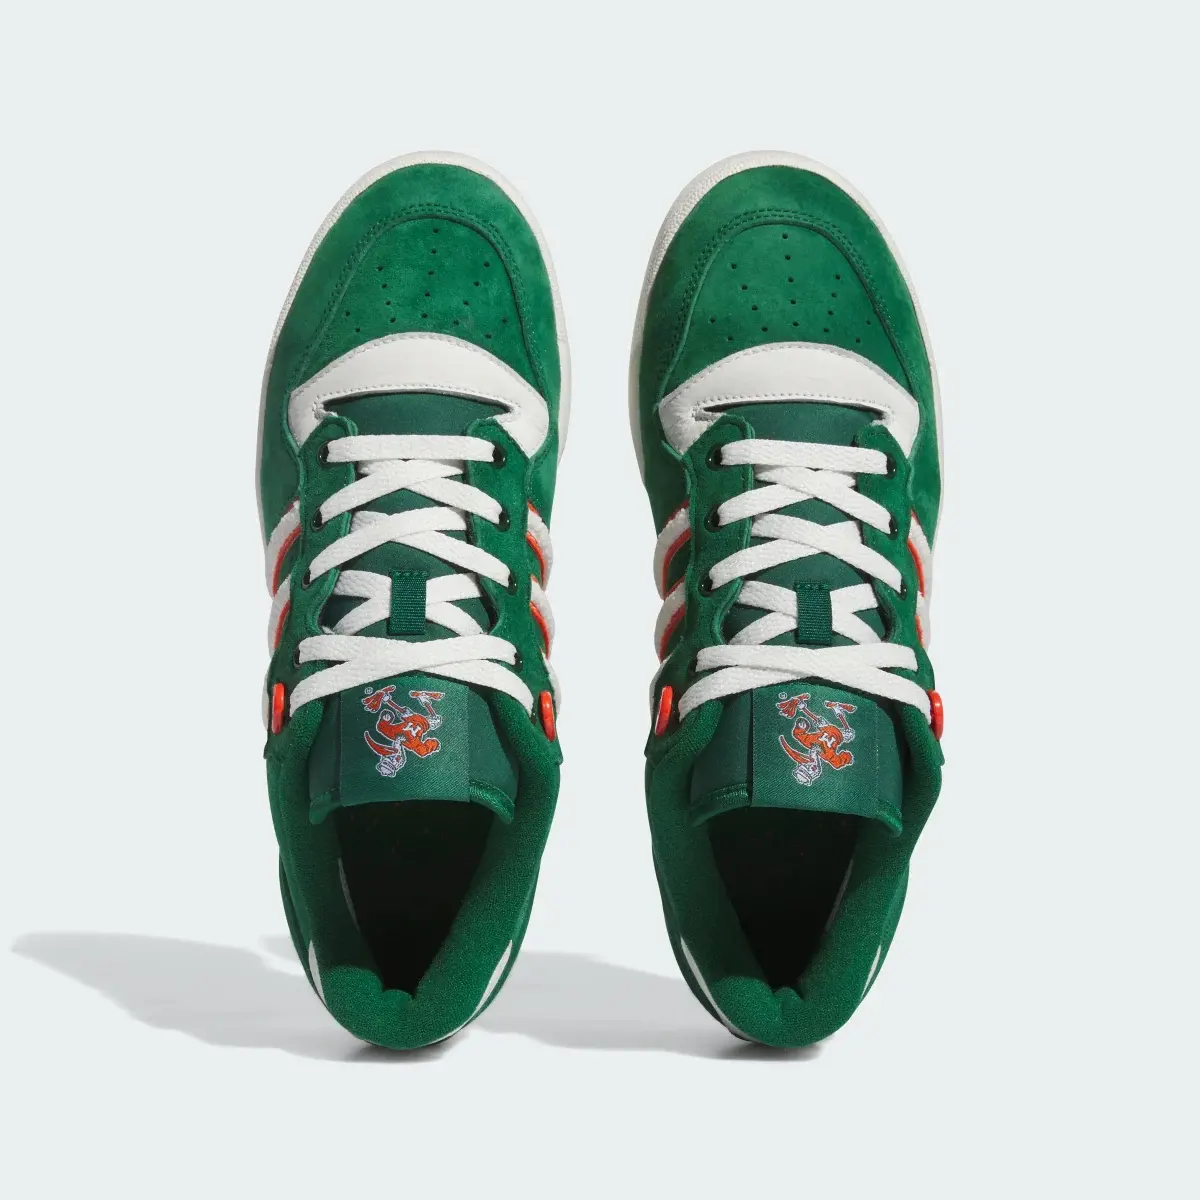 Adidas Miami Rivalry Low Shoes. 3